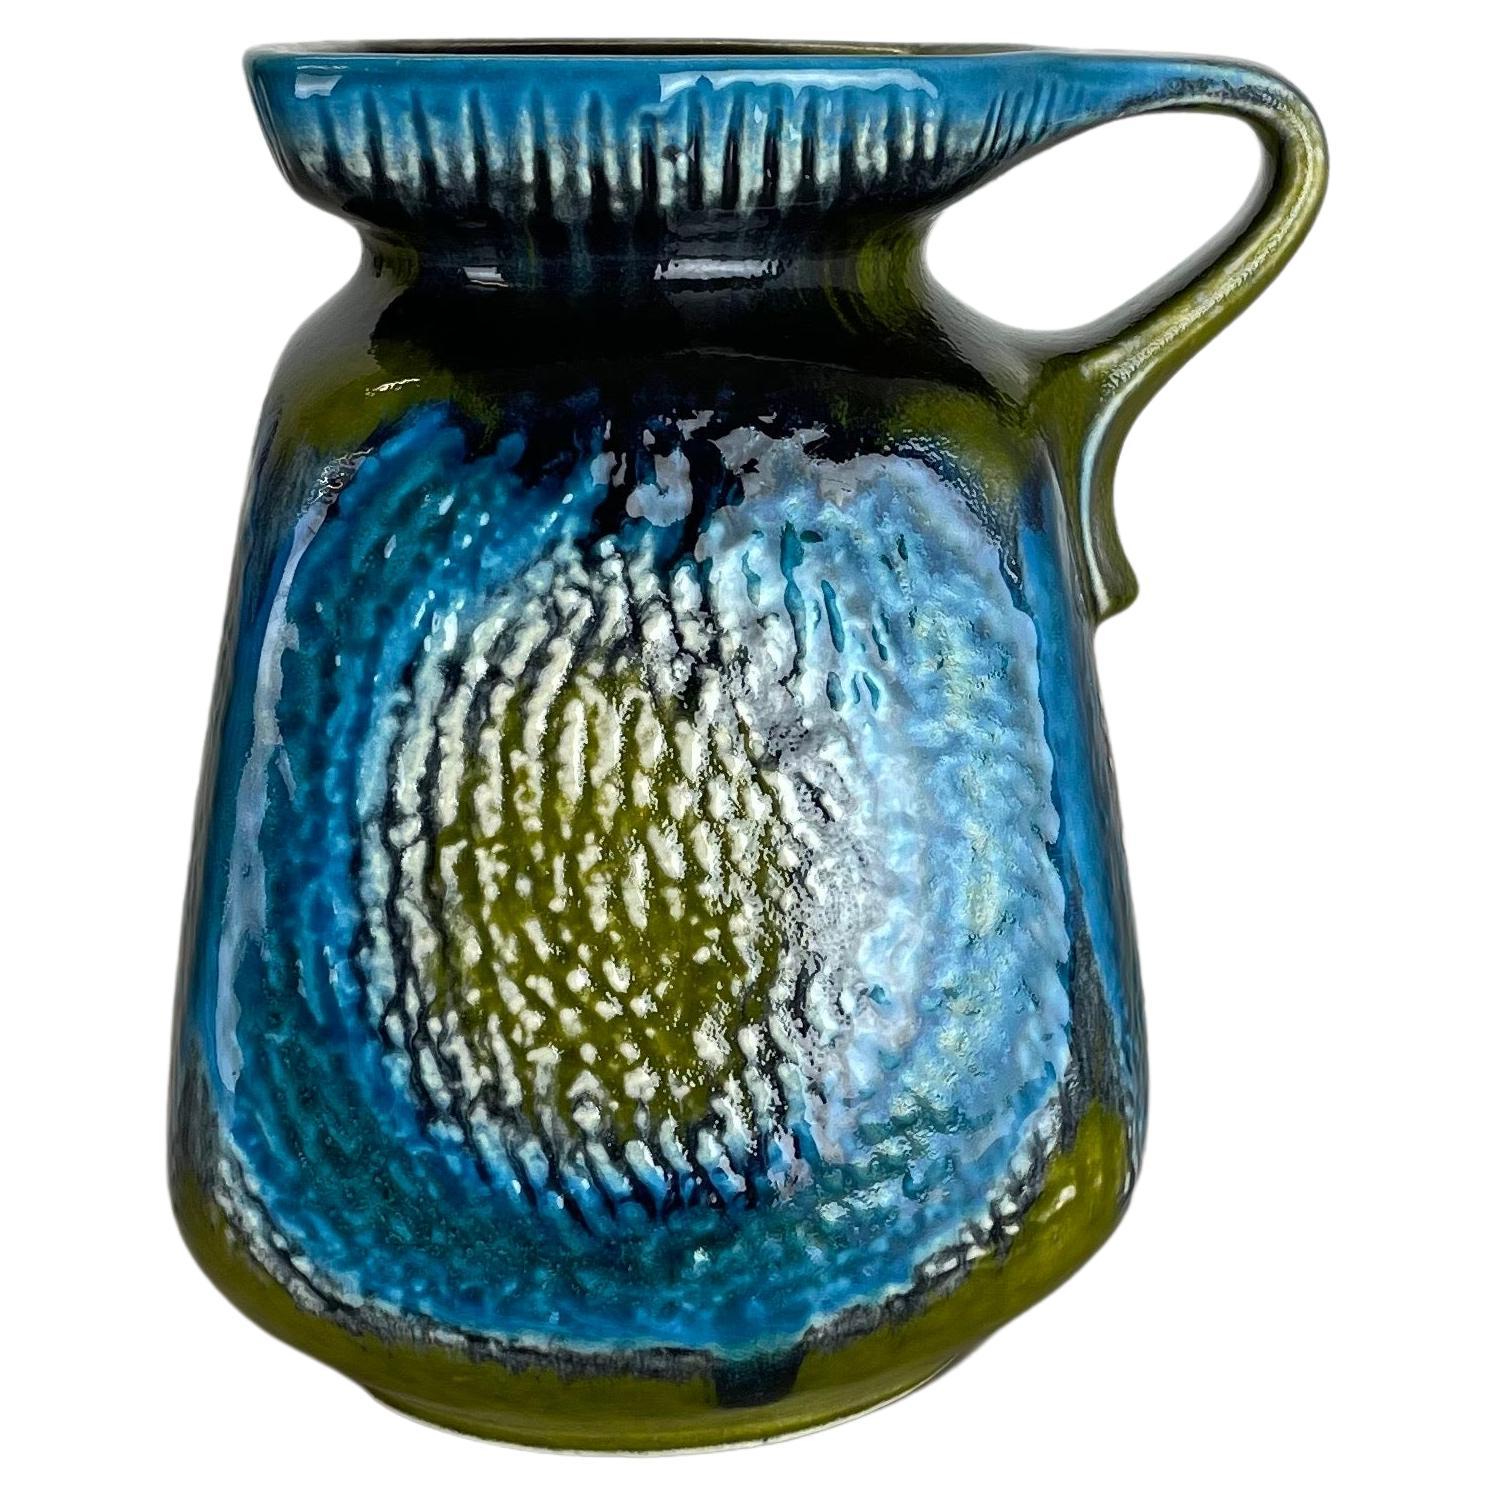 Colorful Fat Lava Pottery "Green and Blue" Vase Jasba Ceramics, Germany, 1970s For Sale